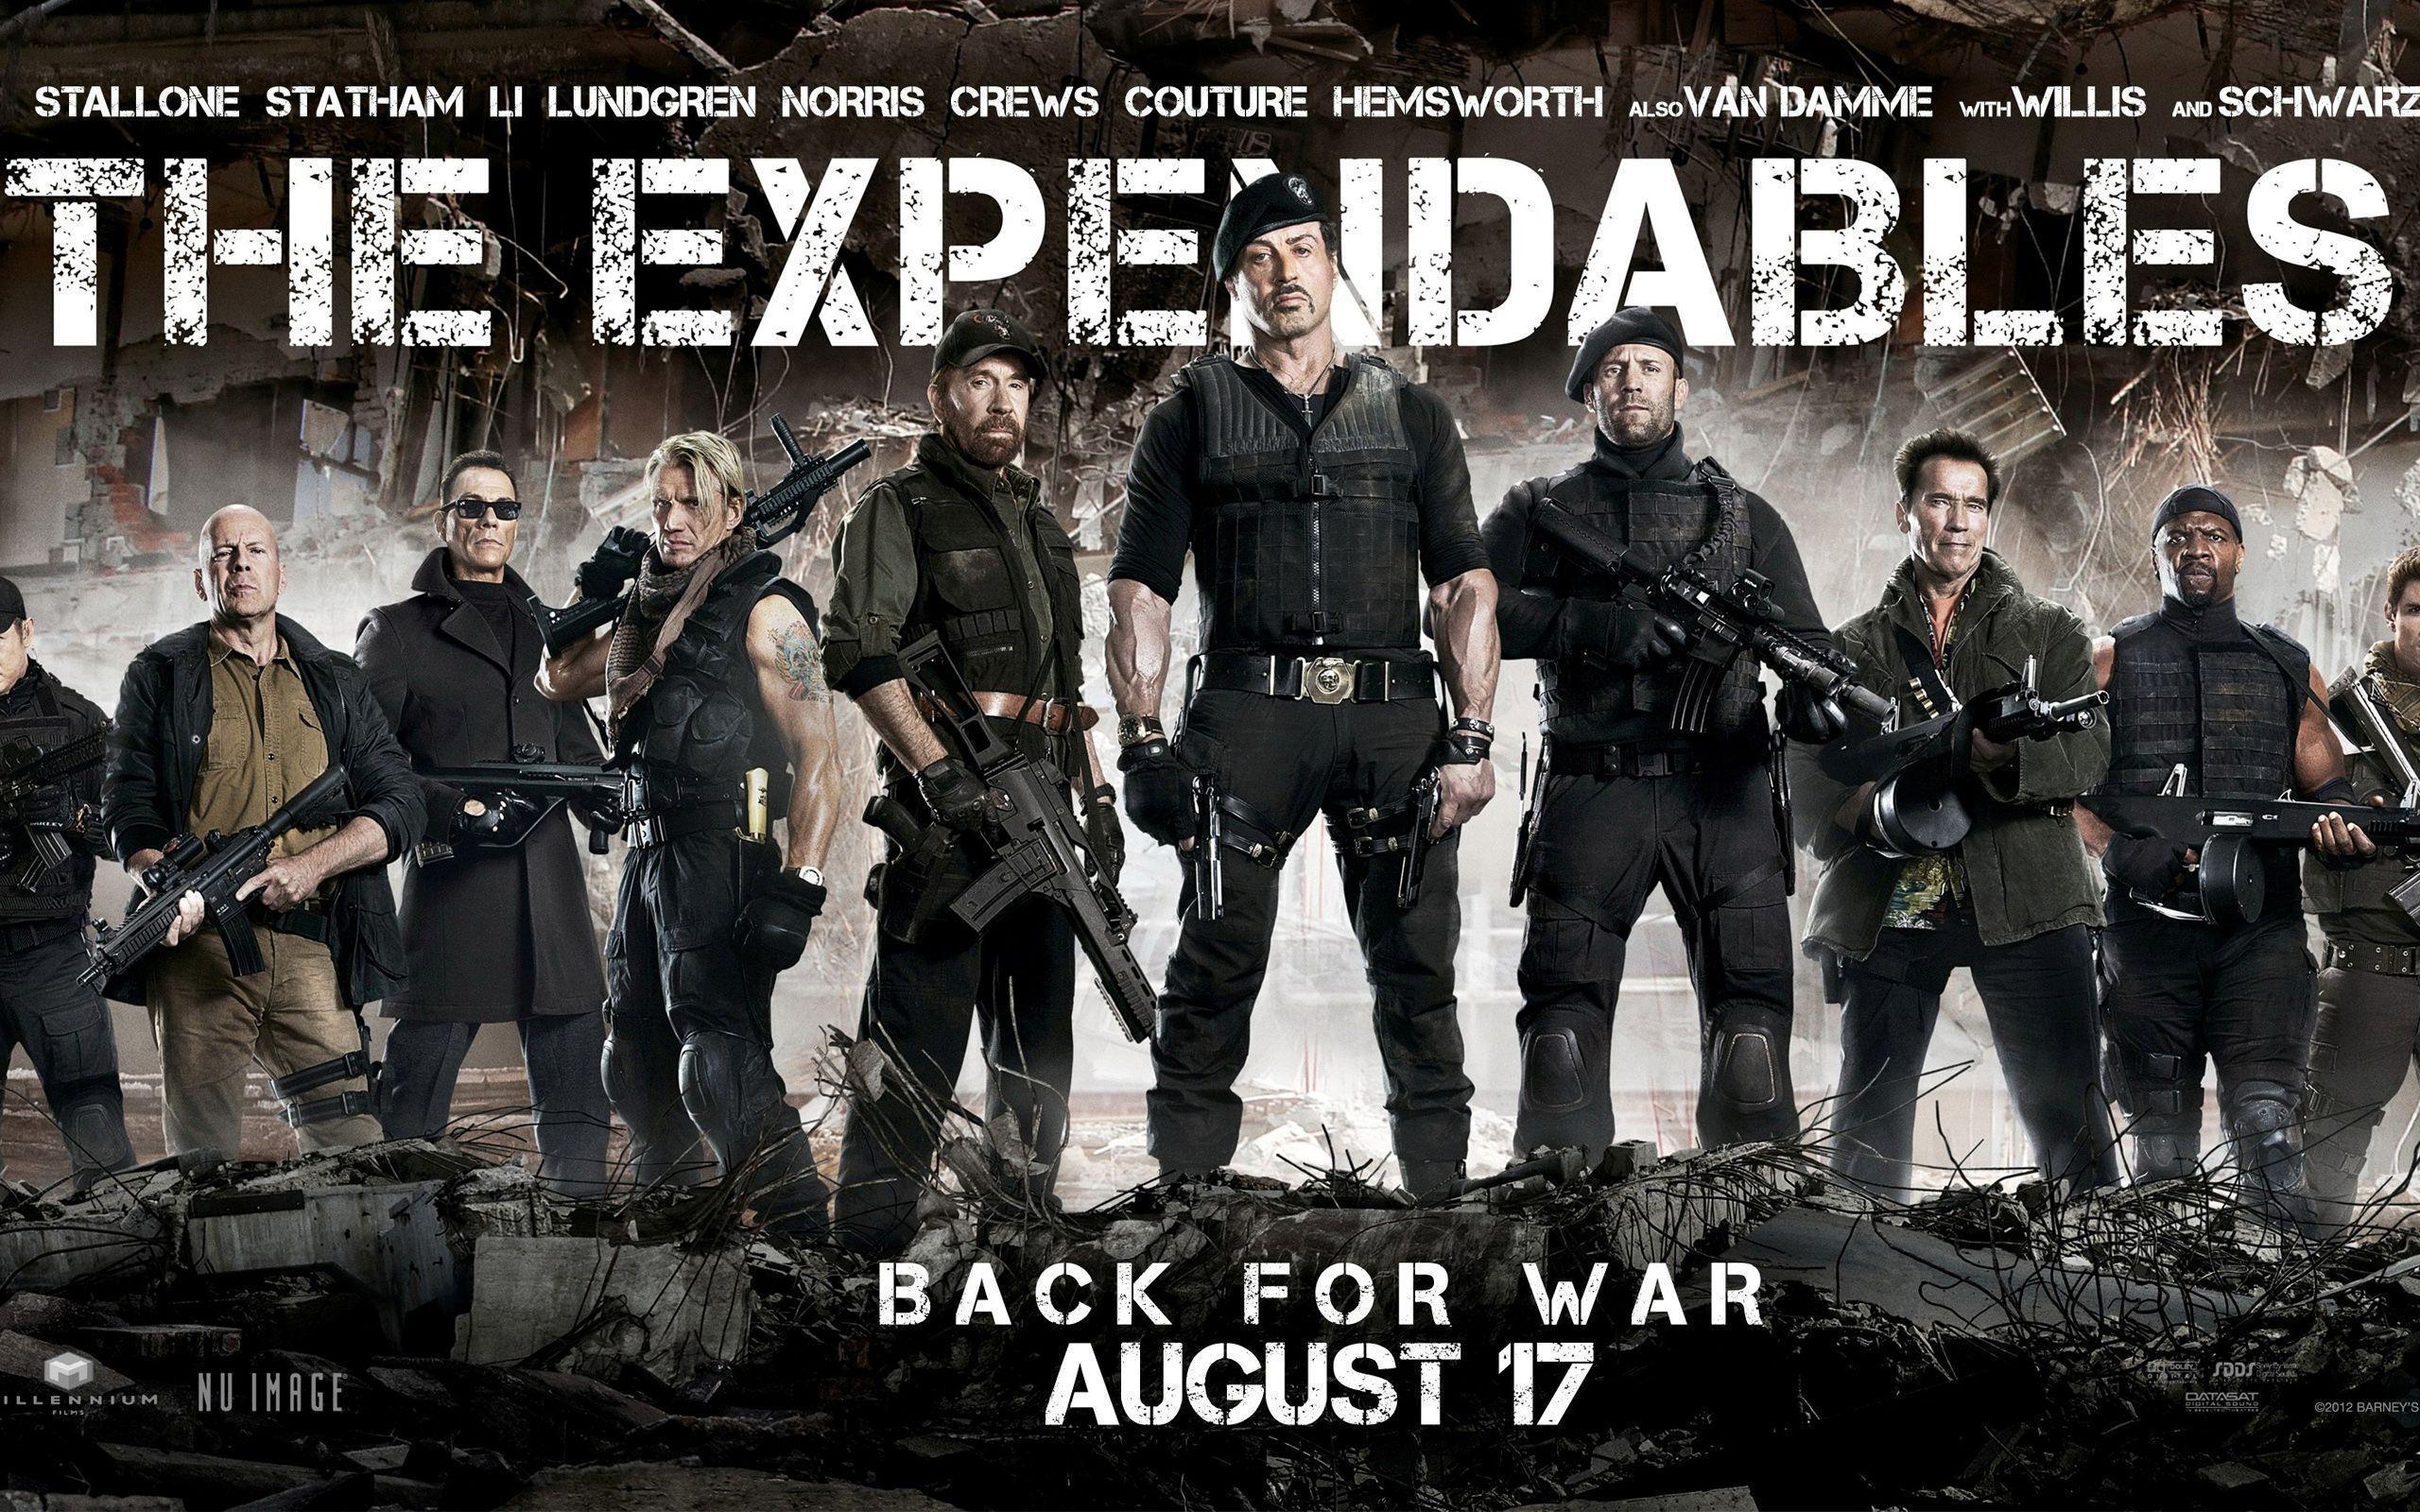 Wallpaper Tagged With EXPENDABLES. EXPENDABLES HD Wallpaper